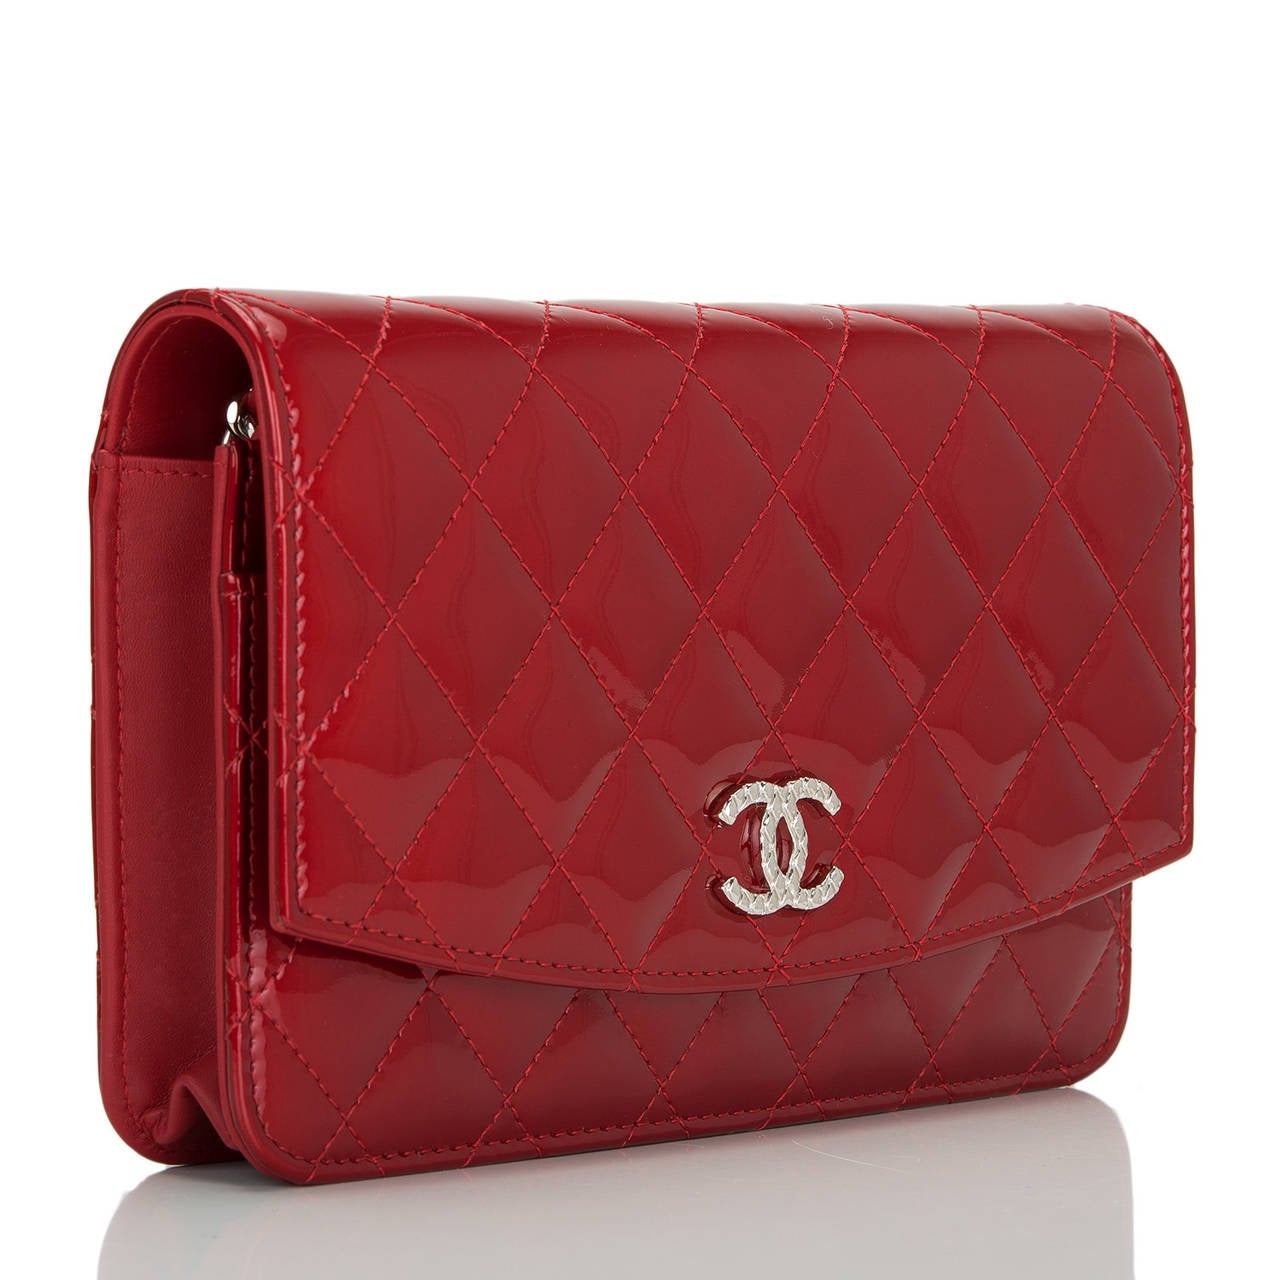 This WOC in a beautiful red color patent leather features signature Chanel quilting, front flap with CC charm and hidden snap closure, expandable sides and bottom, half moon rear pocket and interwoven silver tone chain and leather shoulder/crossbody